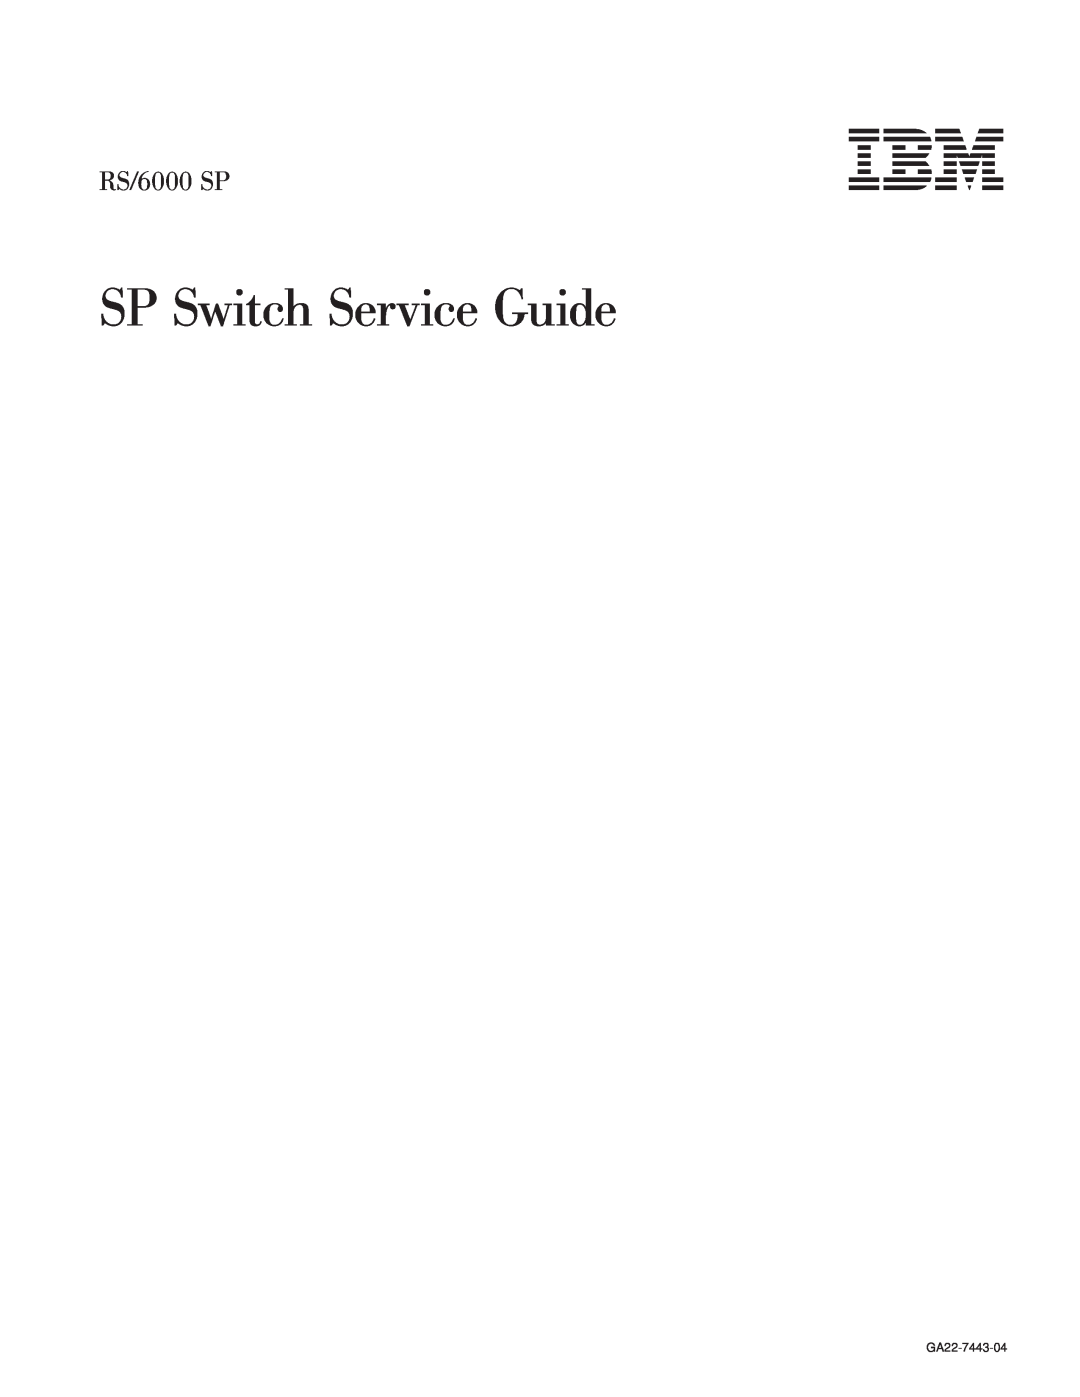 IBM RS/6000 SP manual SP Switch Service Guide, GA22-7443-04 